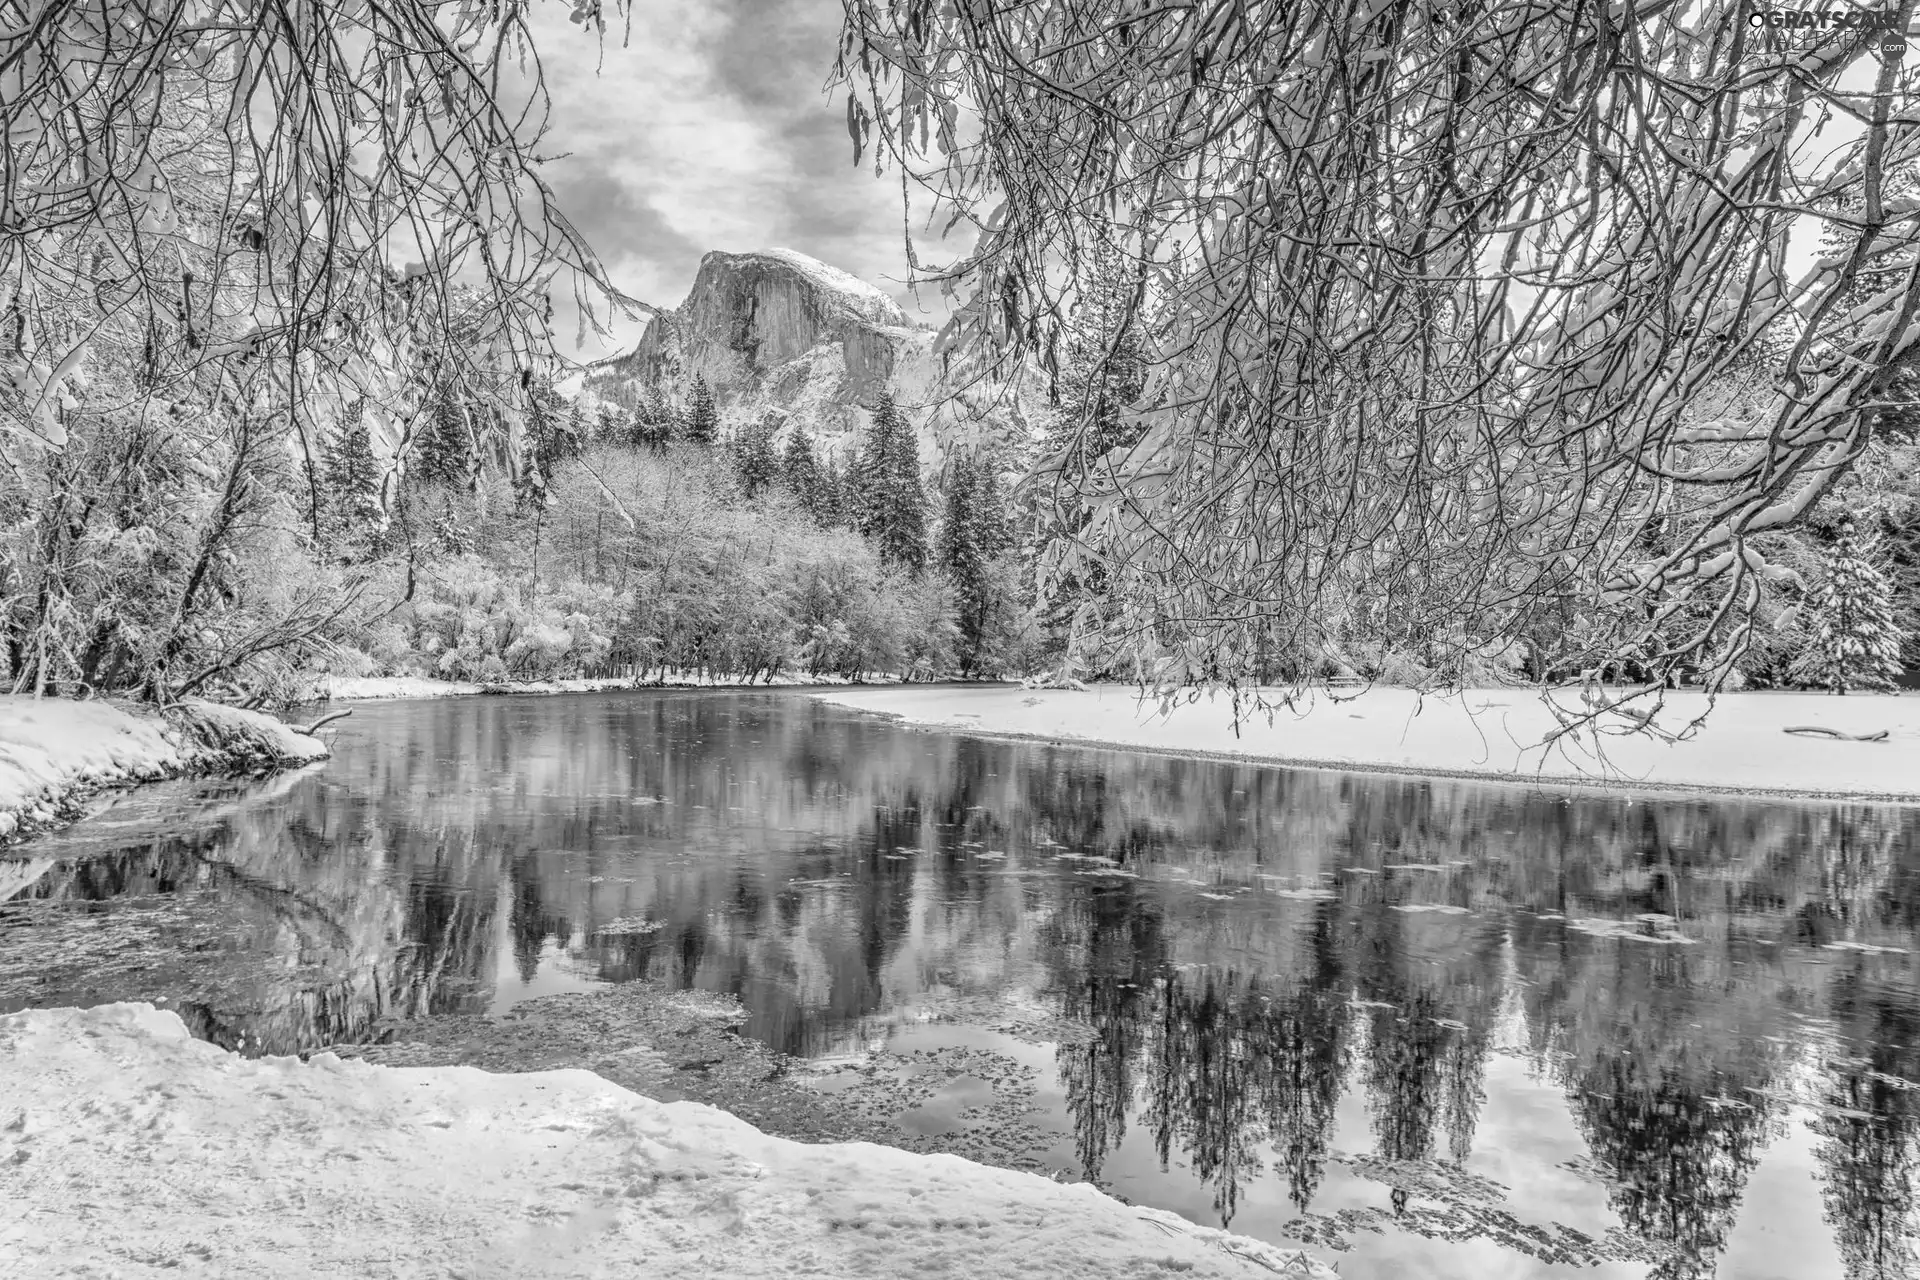 State of California, The United States, Yosemite National Park, winter, trees, viewes, Mountains, forest, Merced River